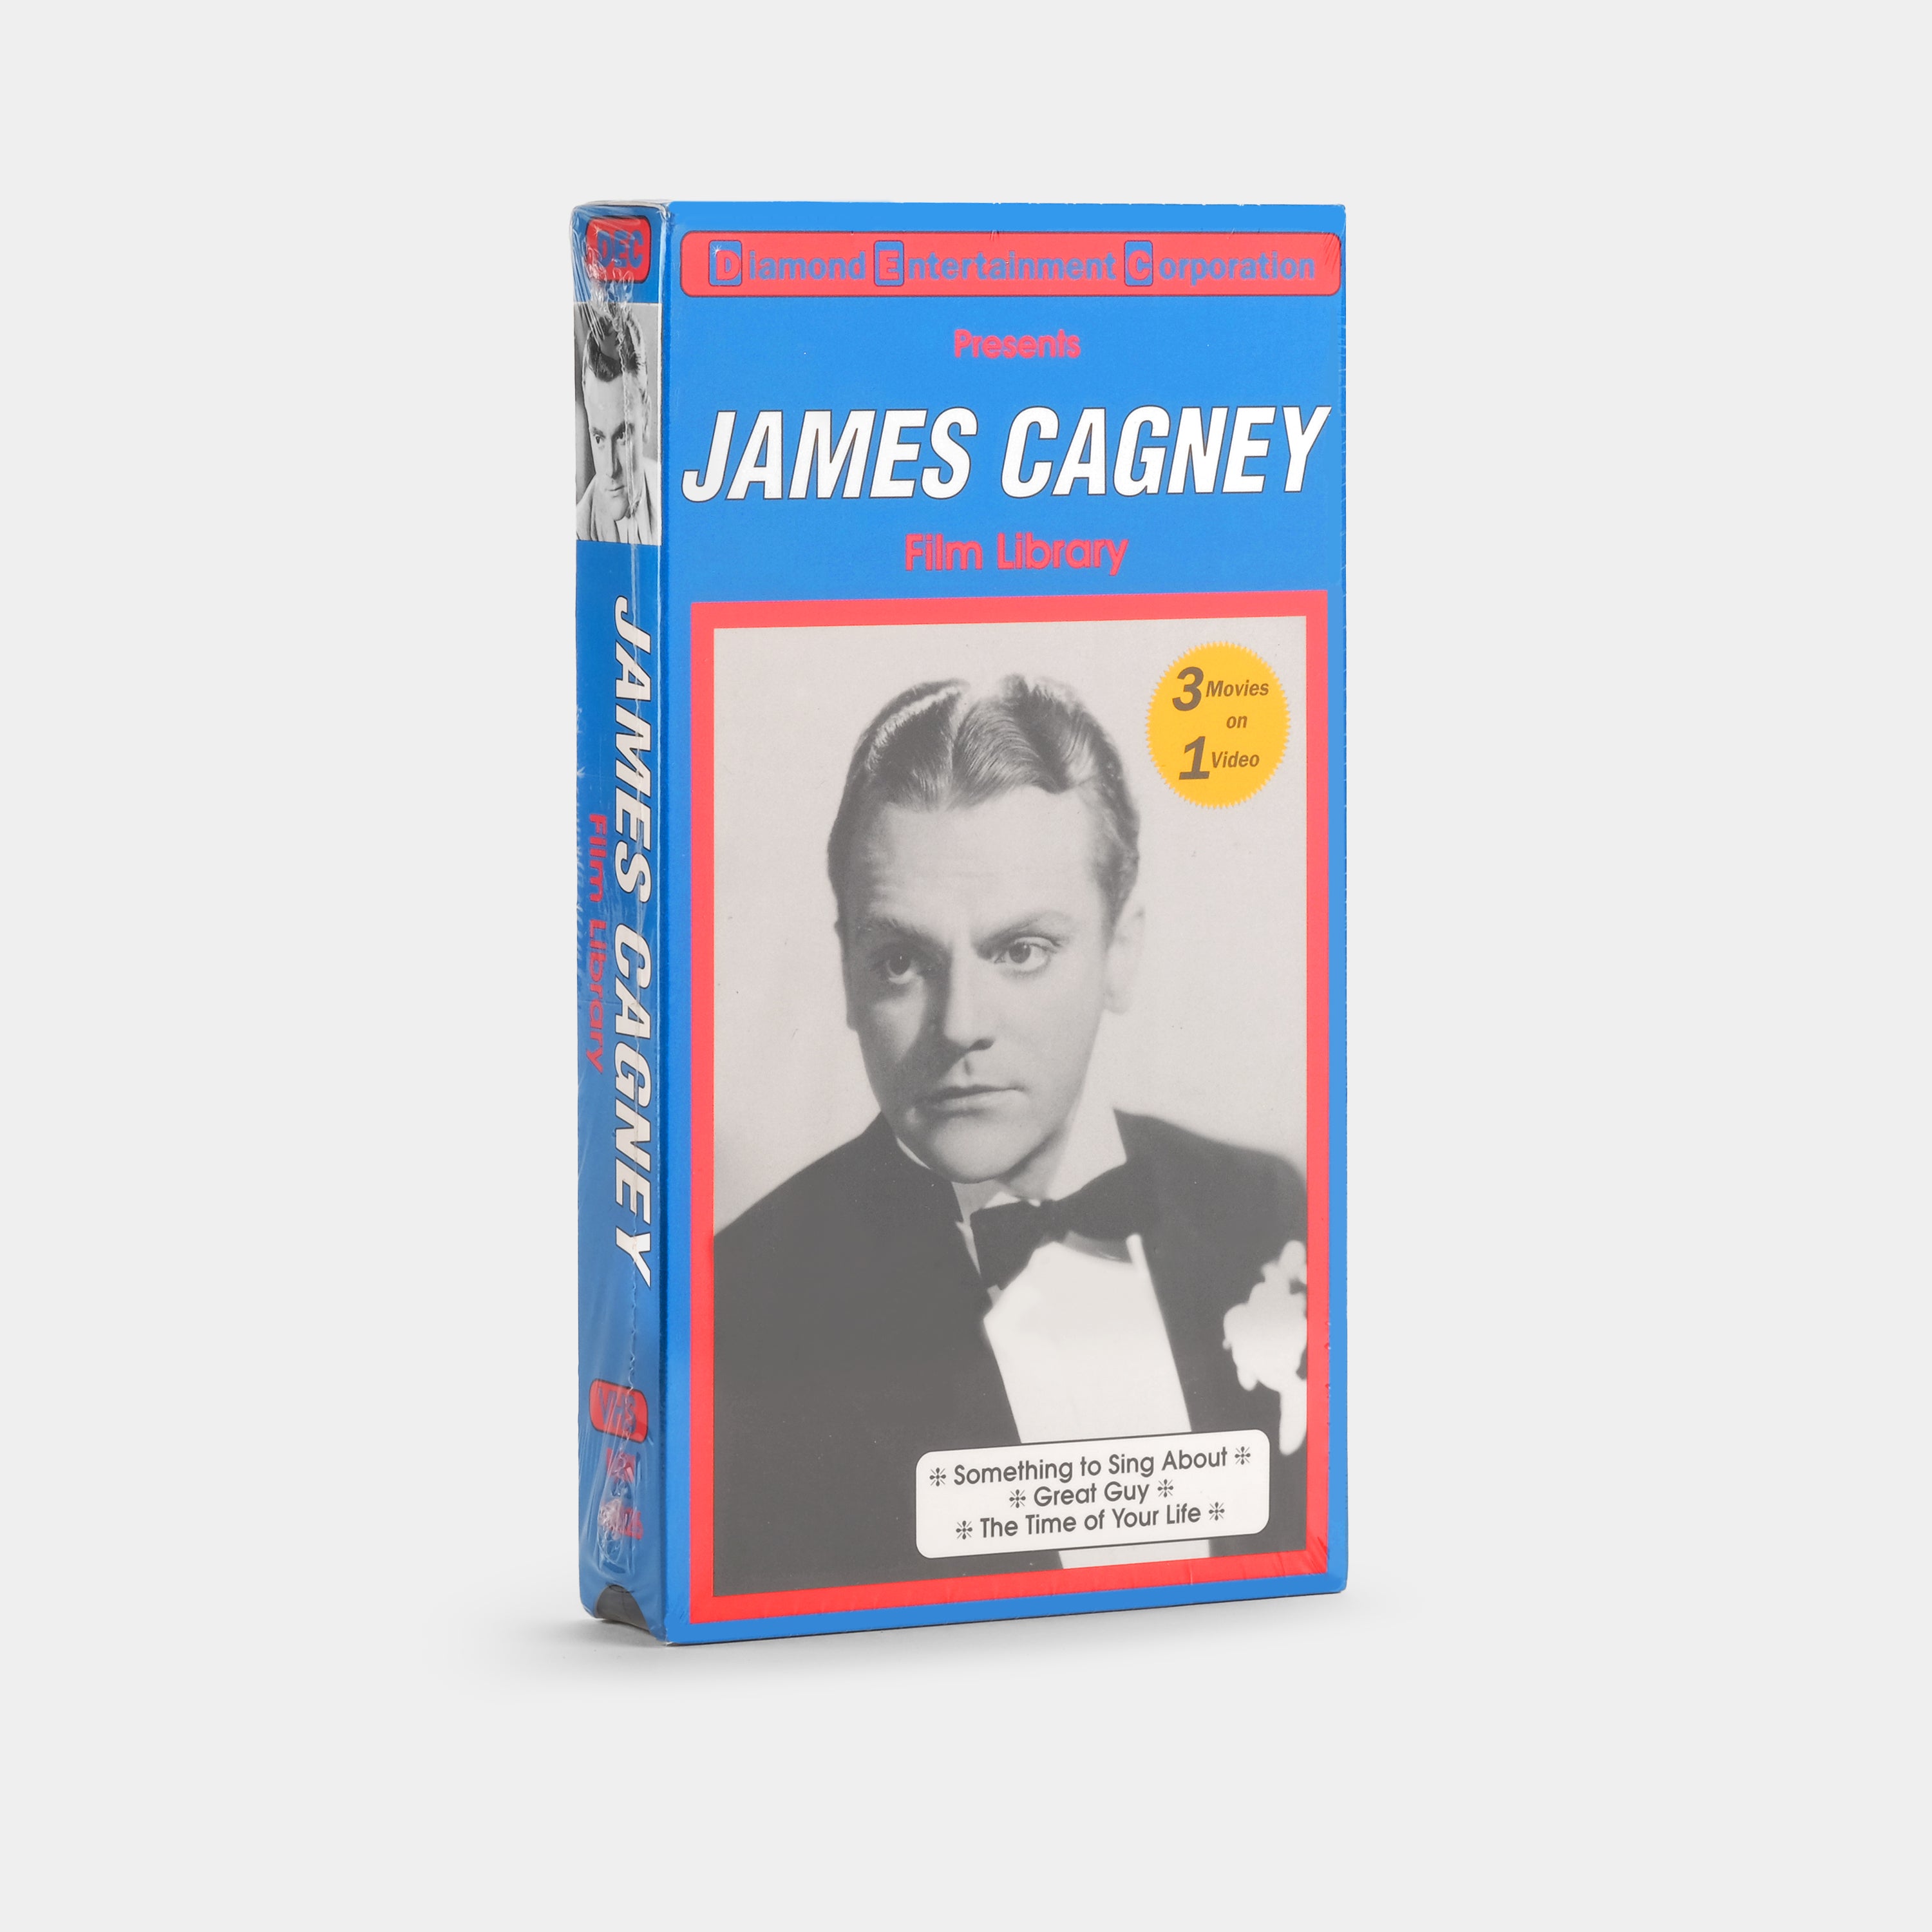 James Cagney: Film Library (Sealed) VHS Tape